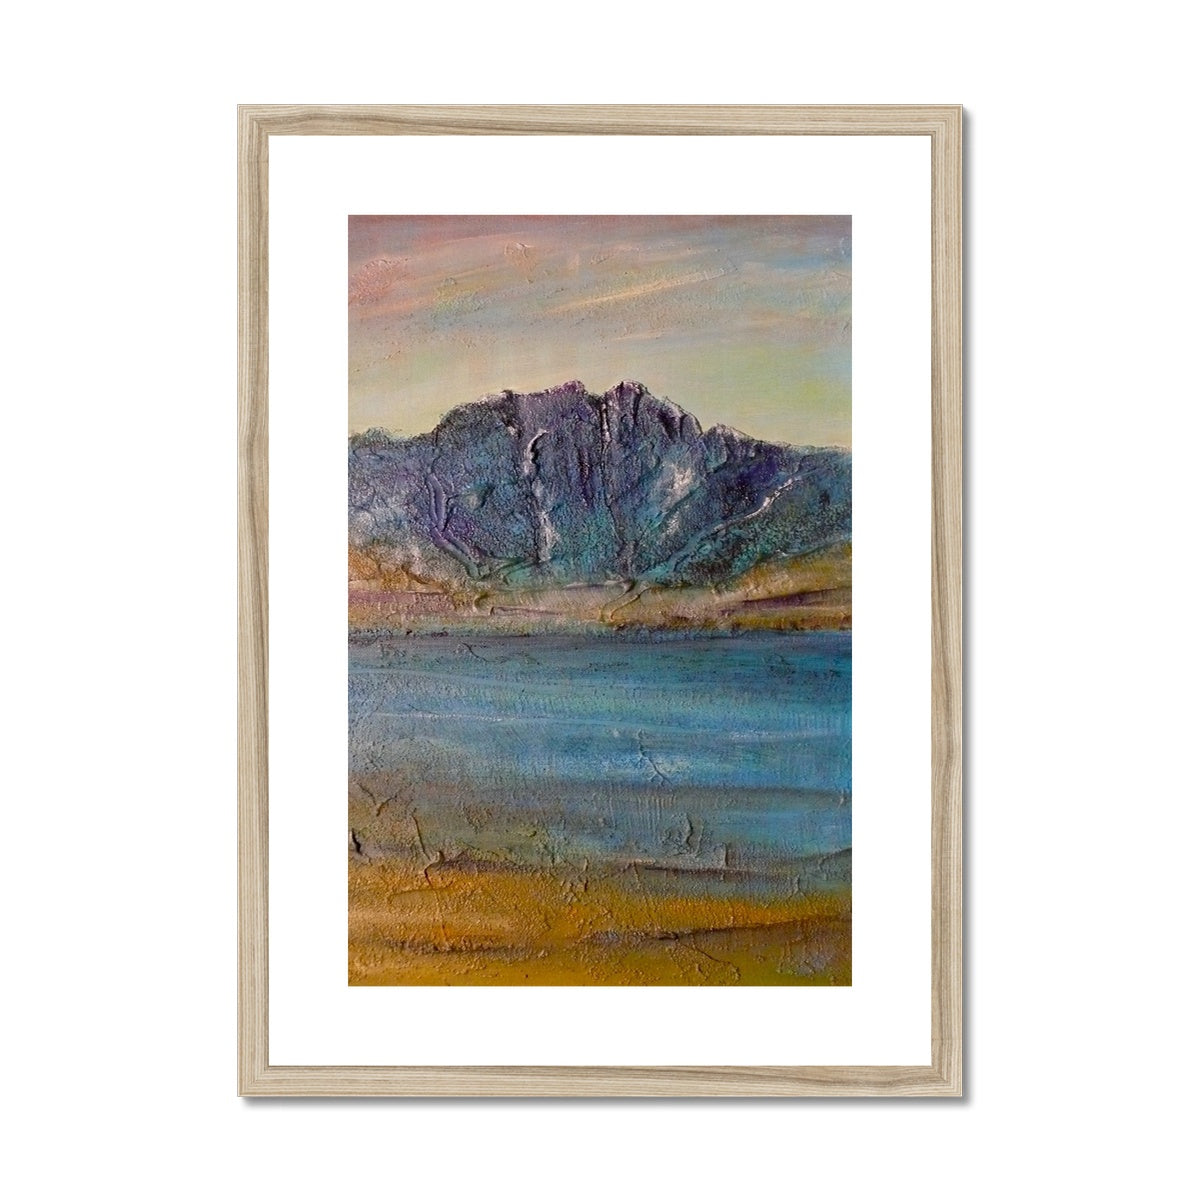 Torridon Painting | Framed & Mounted Prints From Scotland-Framed & Mounted Prints-Scottish Lochs & Mountains Art Gallery-A2 Portrait-Natural Frame-Paintings, Prints, Homeware, Art Gifts From Scotland By Scottish Artist Kevin Hunter